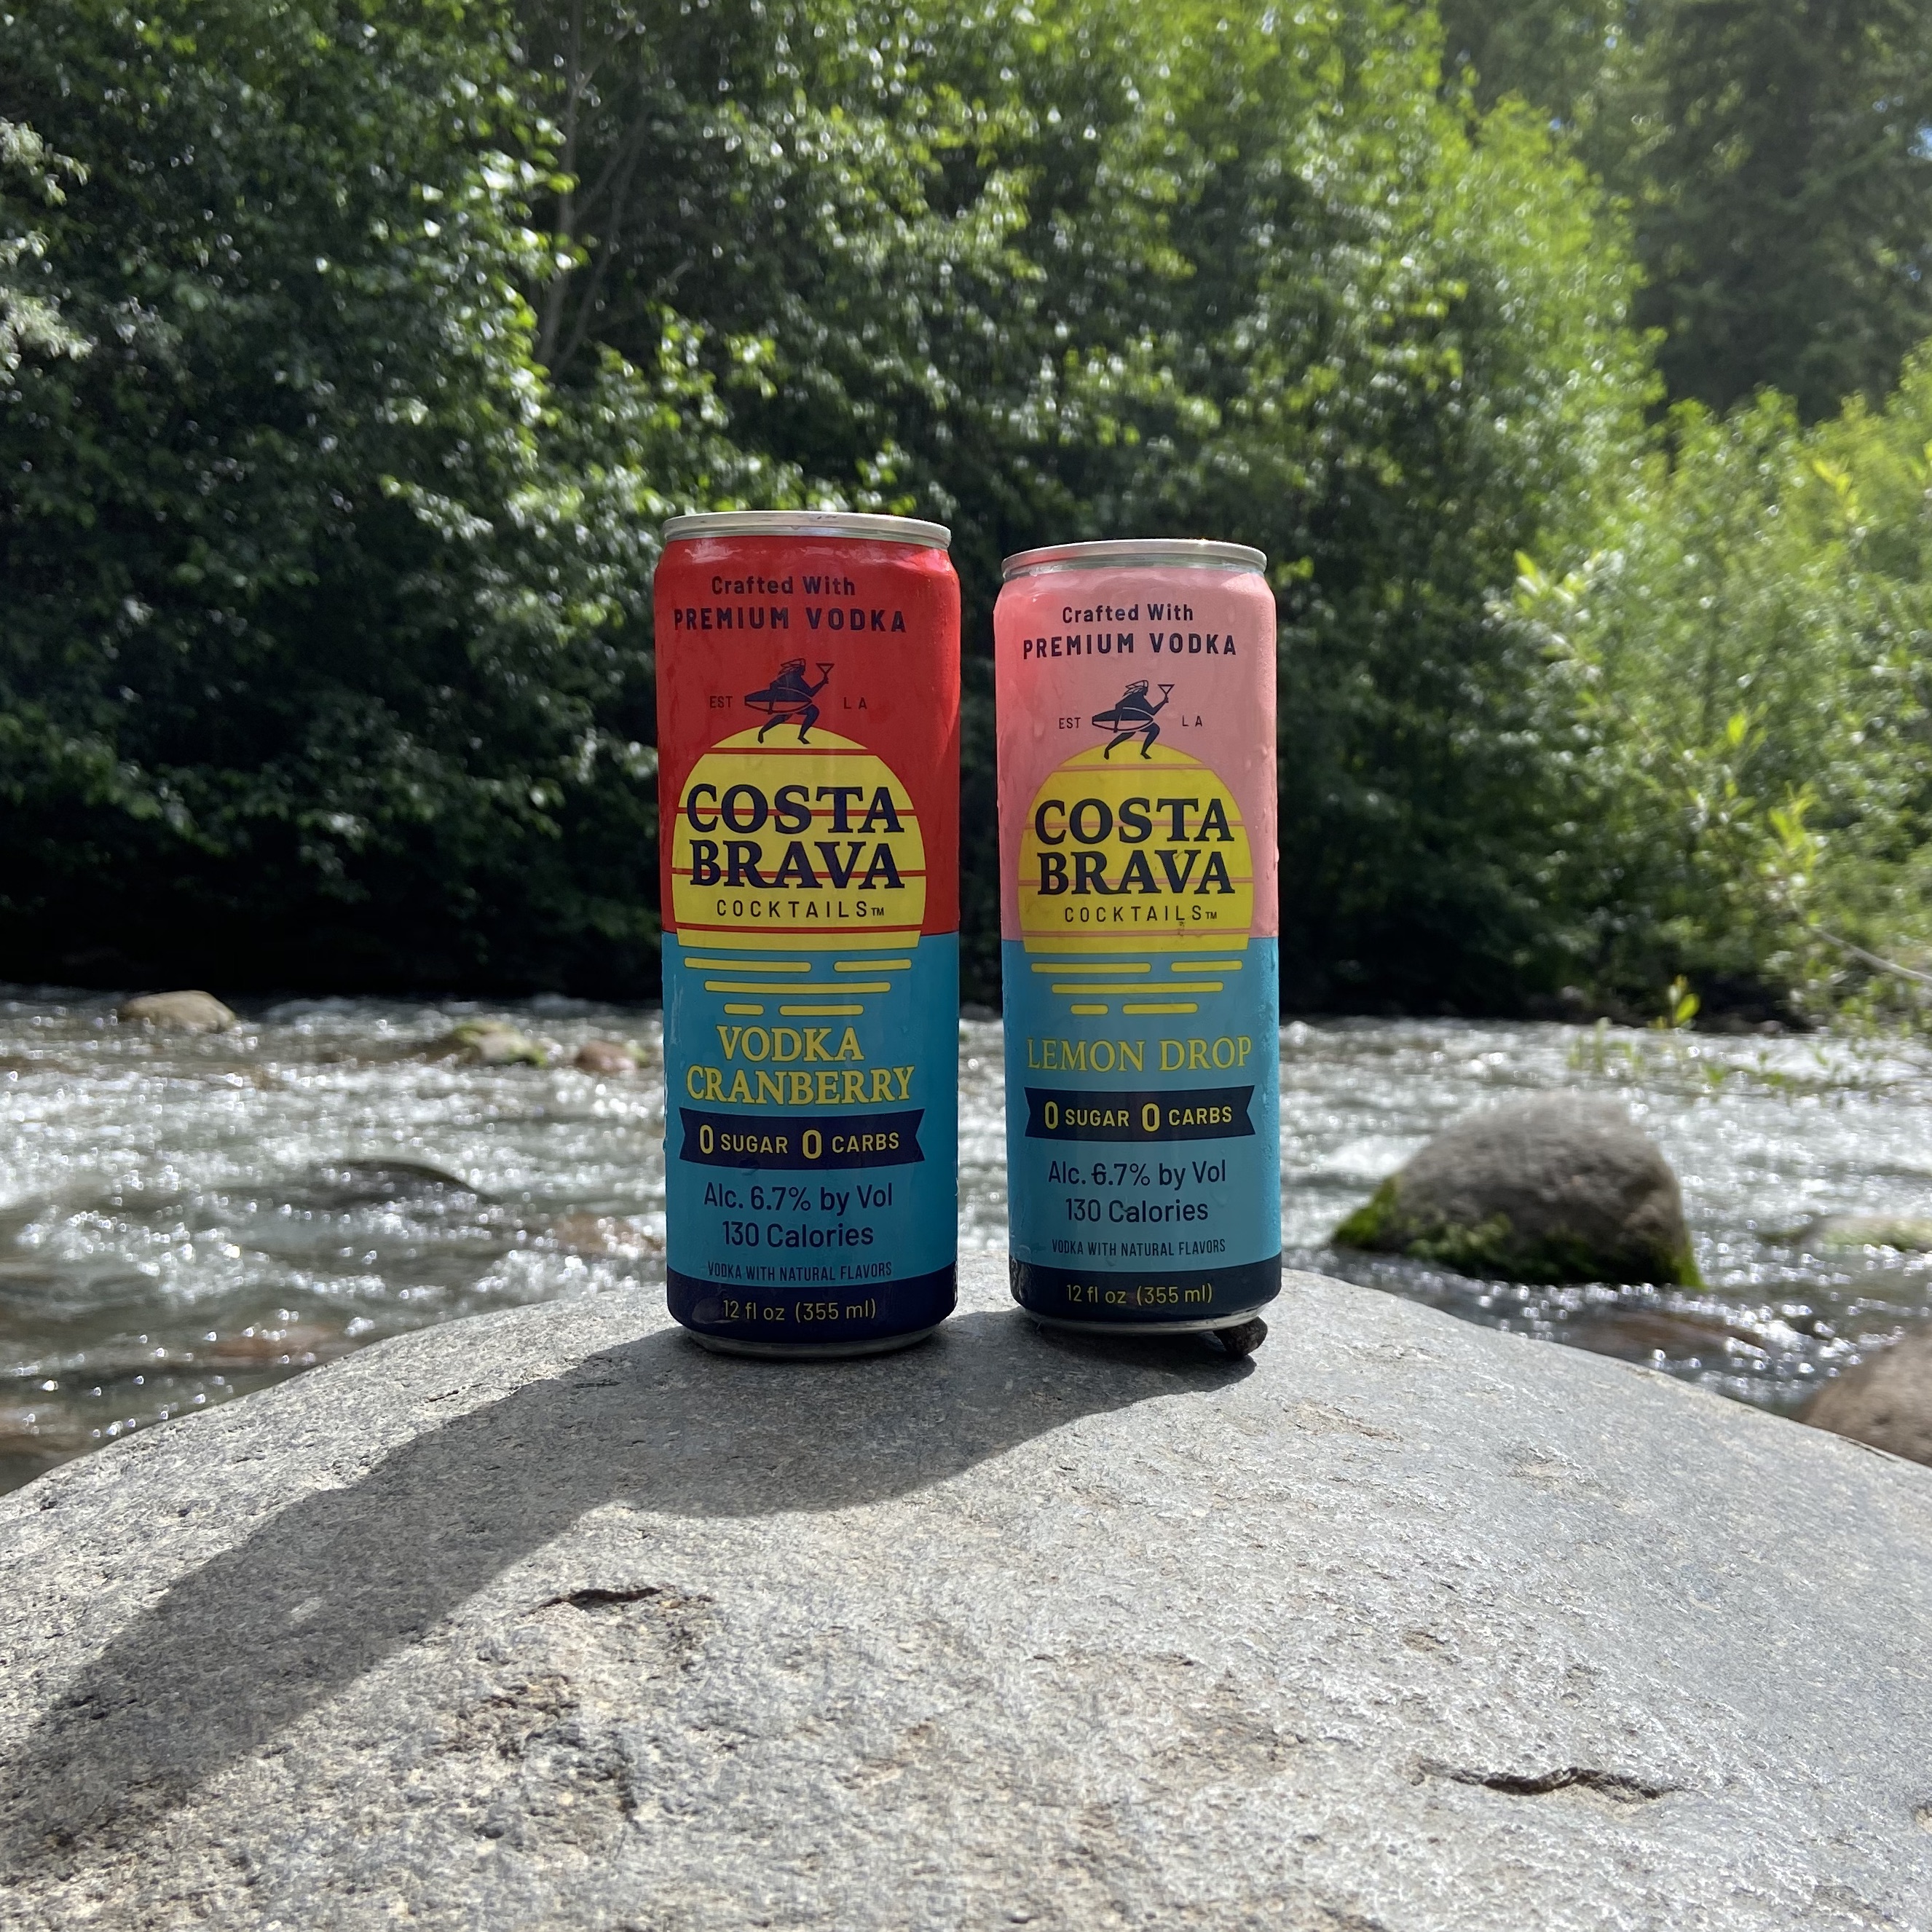 Costa Brava Cocktails in a can features two flavors - Vodka & Cranberry and Lemon Drop.